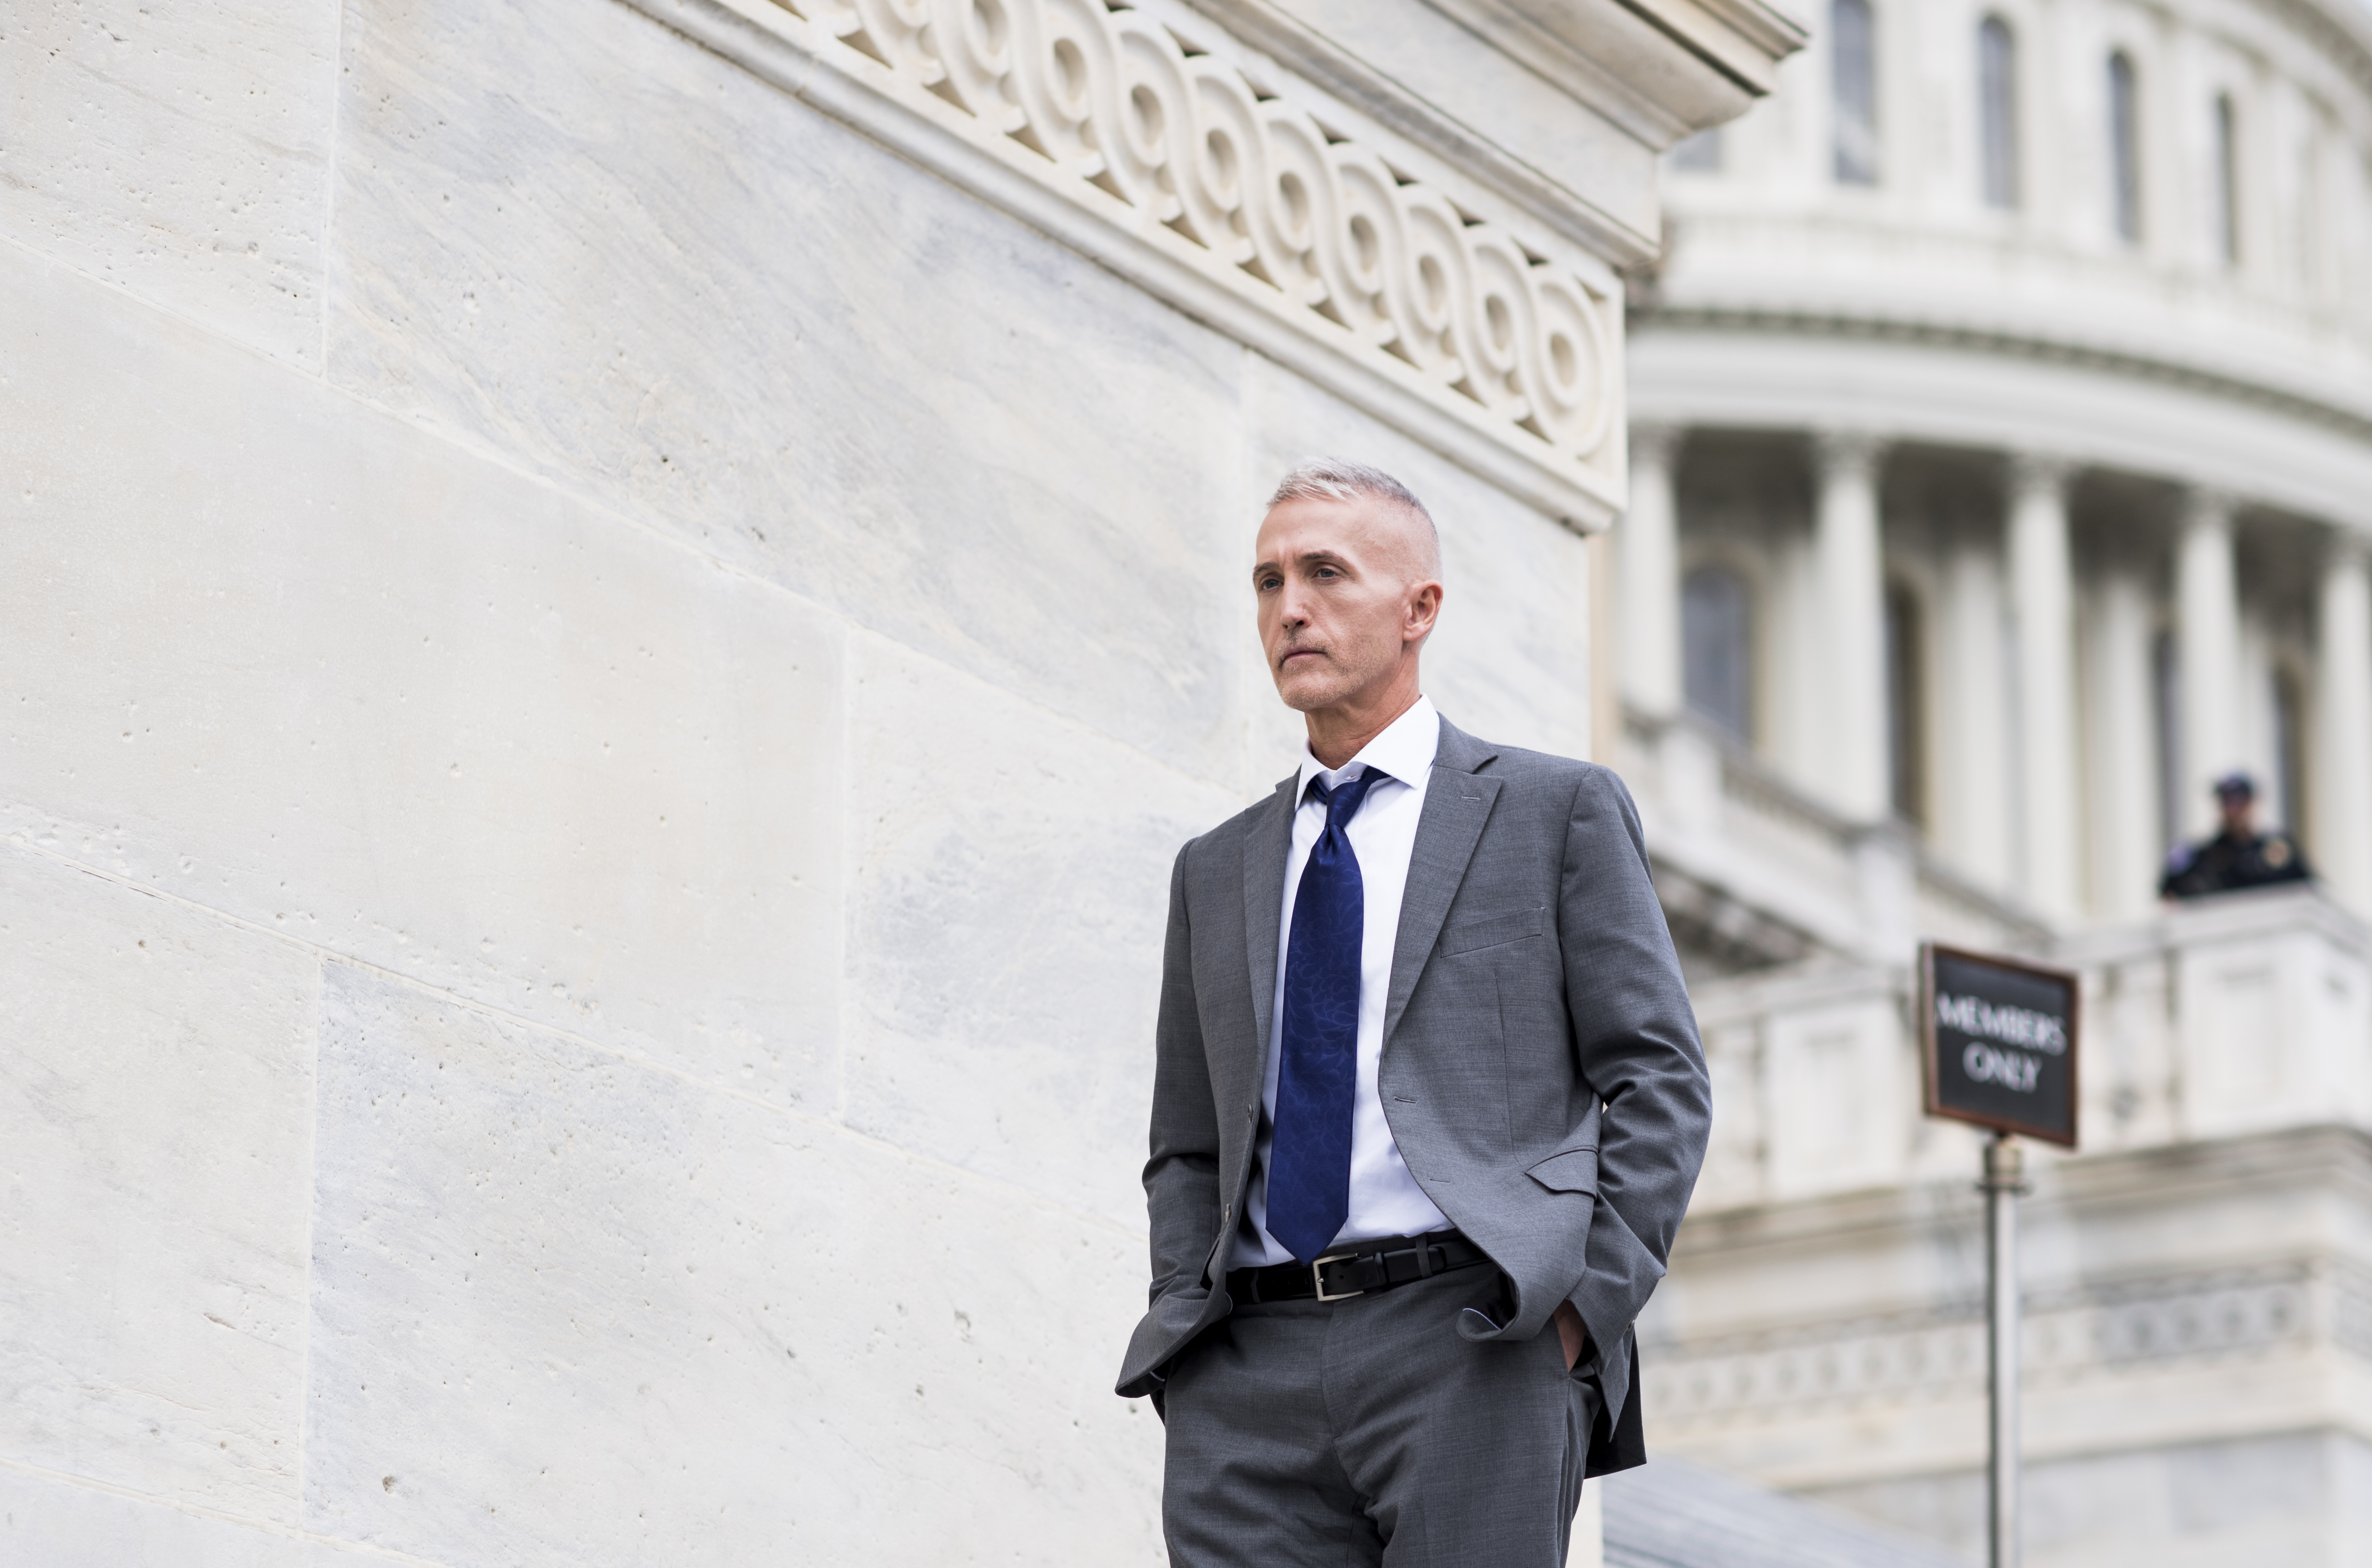 Rep. Trey Gowdy, R-S.C., walks down the House steps at the Capitol on May 4, 2017. (Bill Clark—CQ-Roll Call, Inc./Getty Images)